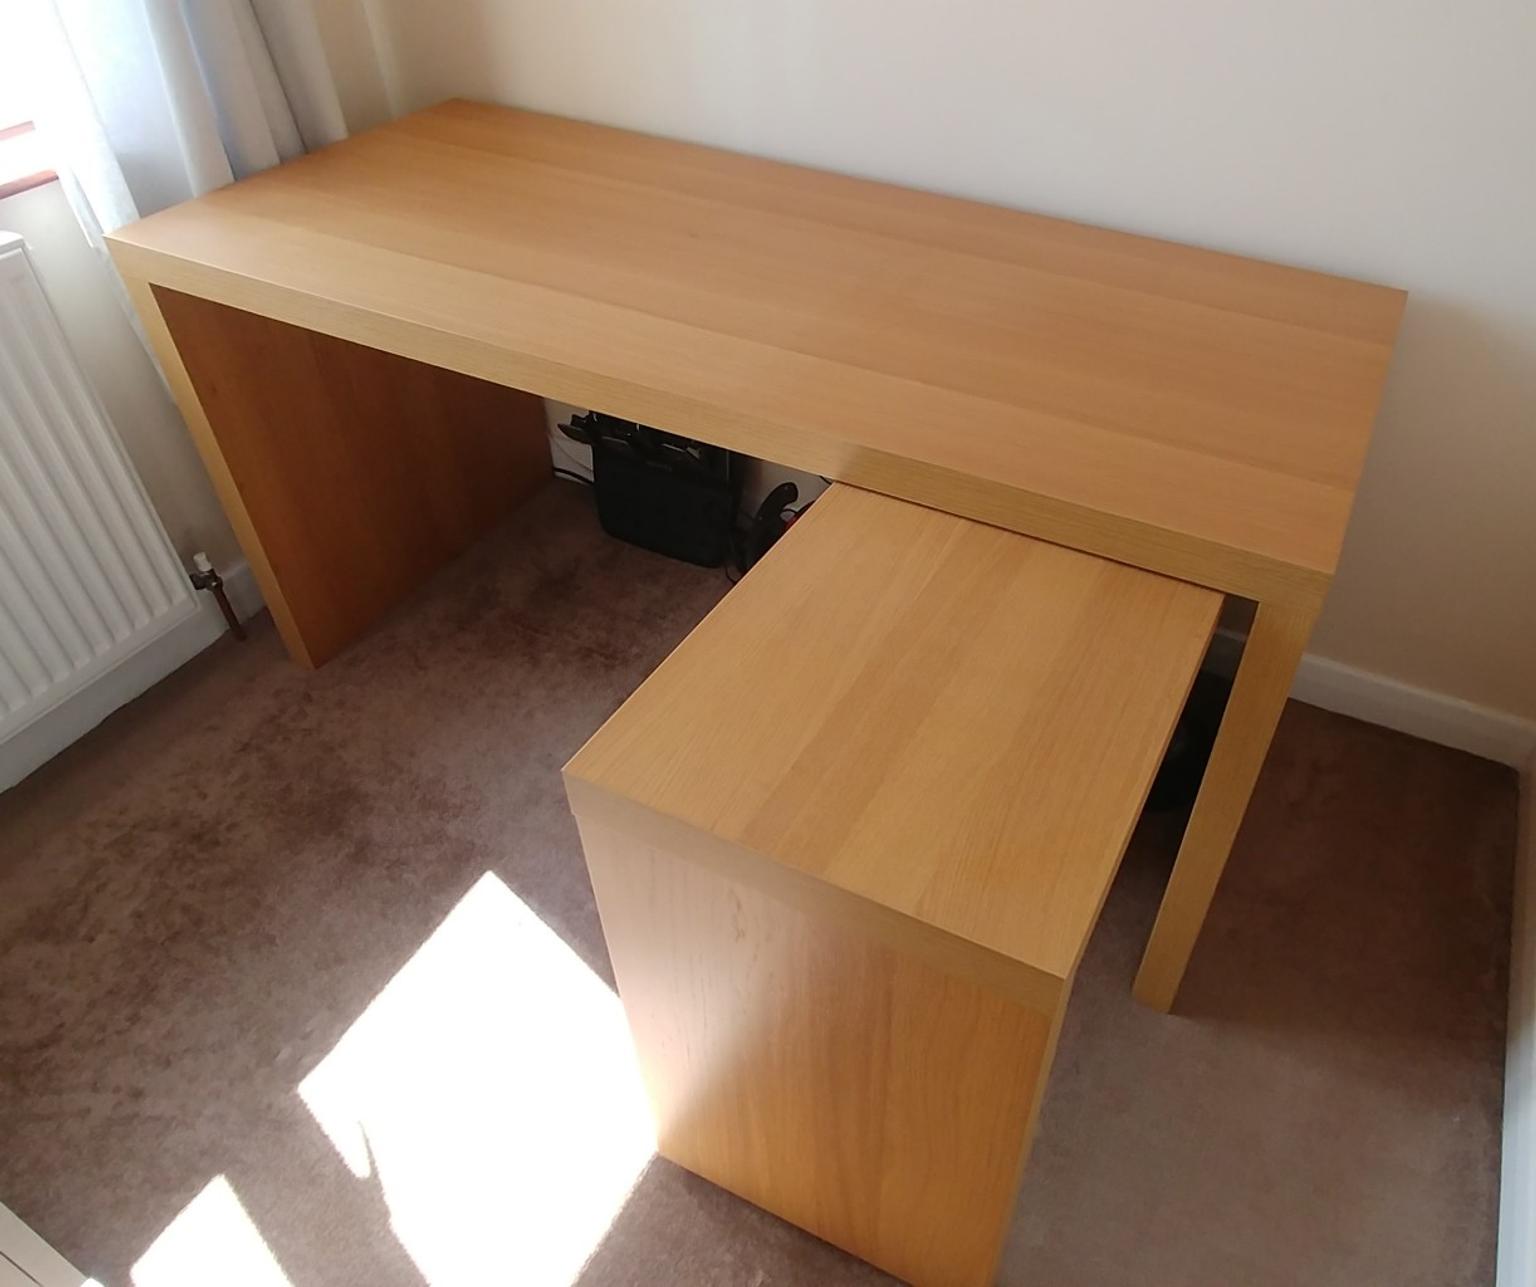 Ikea Malm Oak Desk With Pull Out Station In S21 Derbyshire For